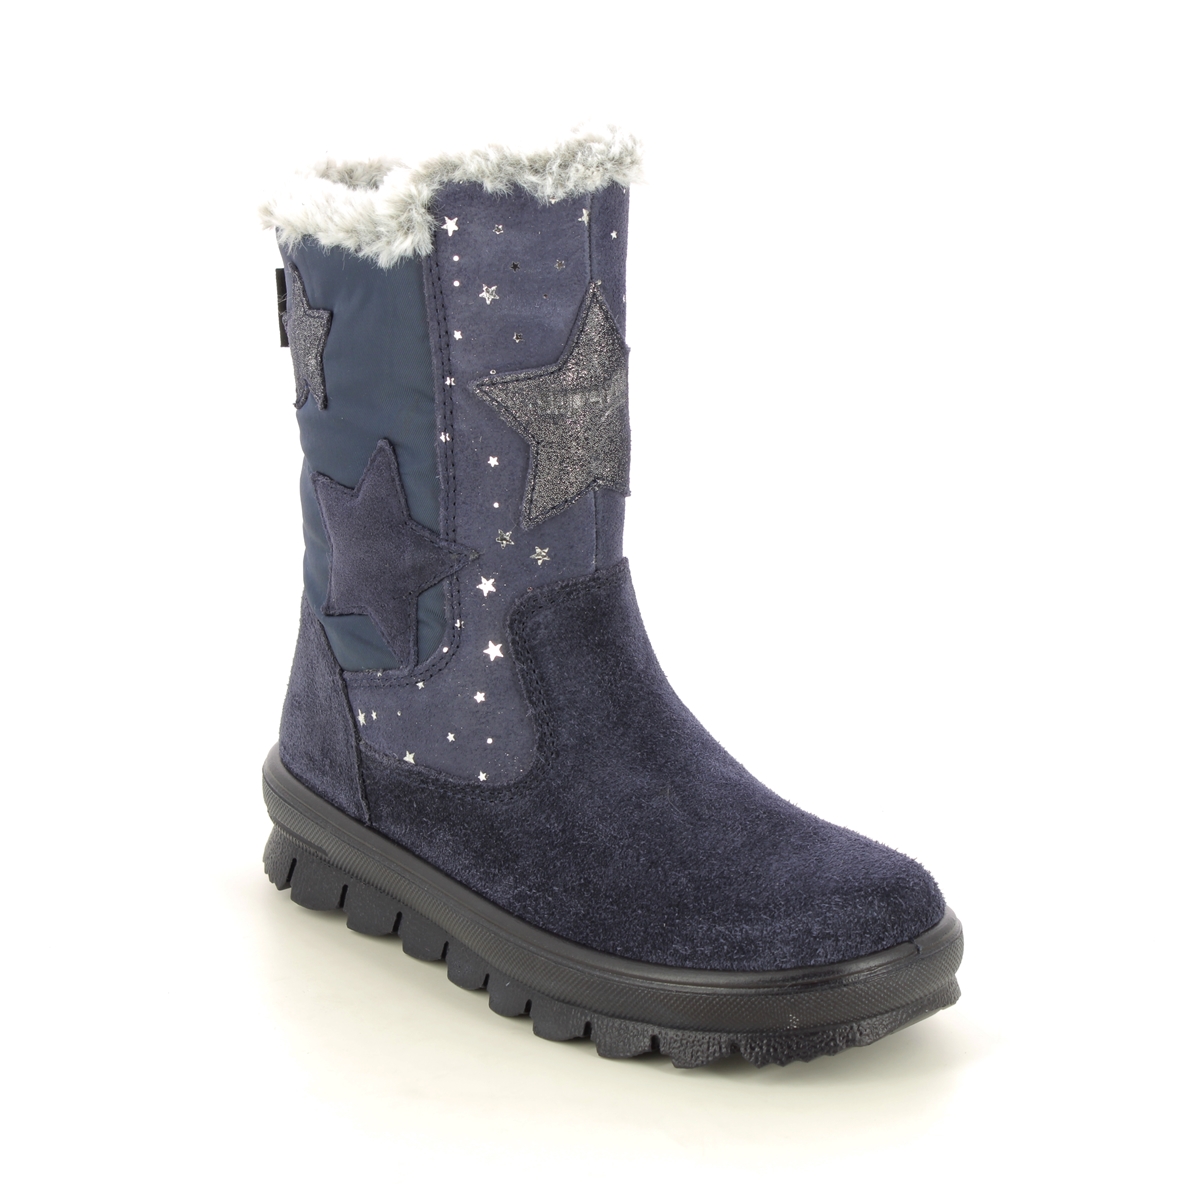 Superfit Flavia Star Gtx Navy Suede Kids Girls Boots 1000219-8000 In Size 32 In Plain Navy Suede For kids